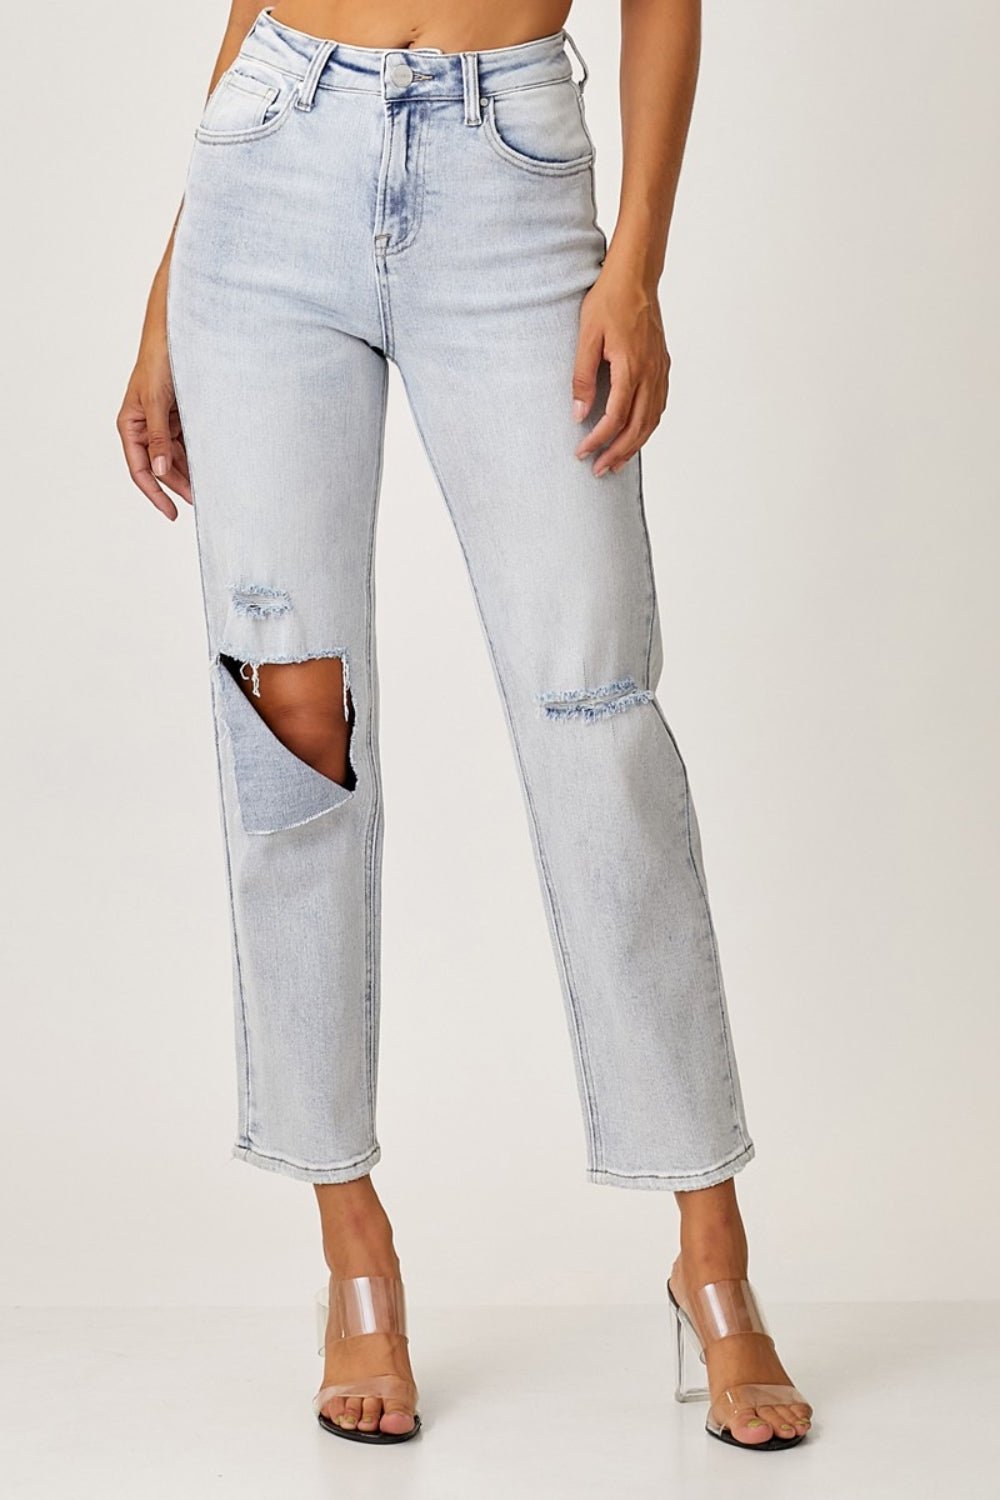 Light Wash High Rise Distressed Relaxed Fit JeansJeansRISEN